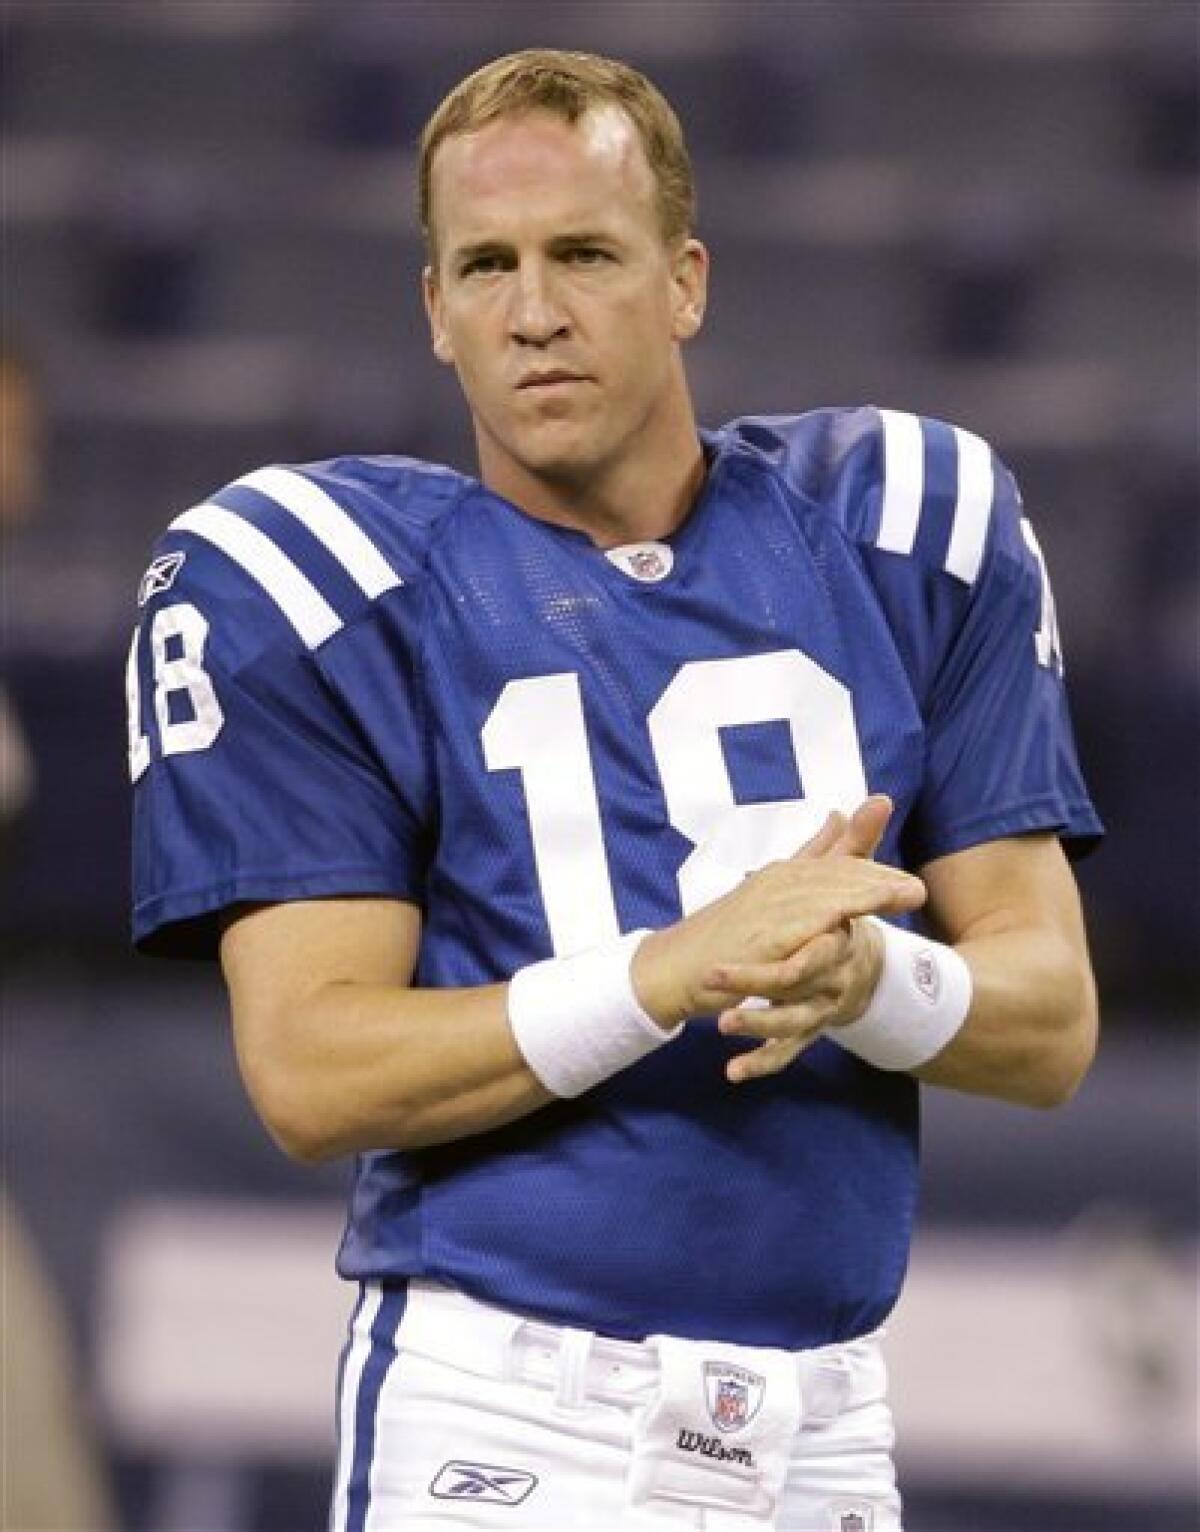 Payton and Manning, the rest of the story. - Mississippi Today